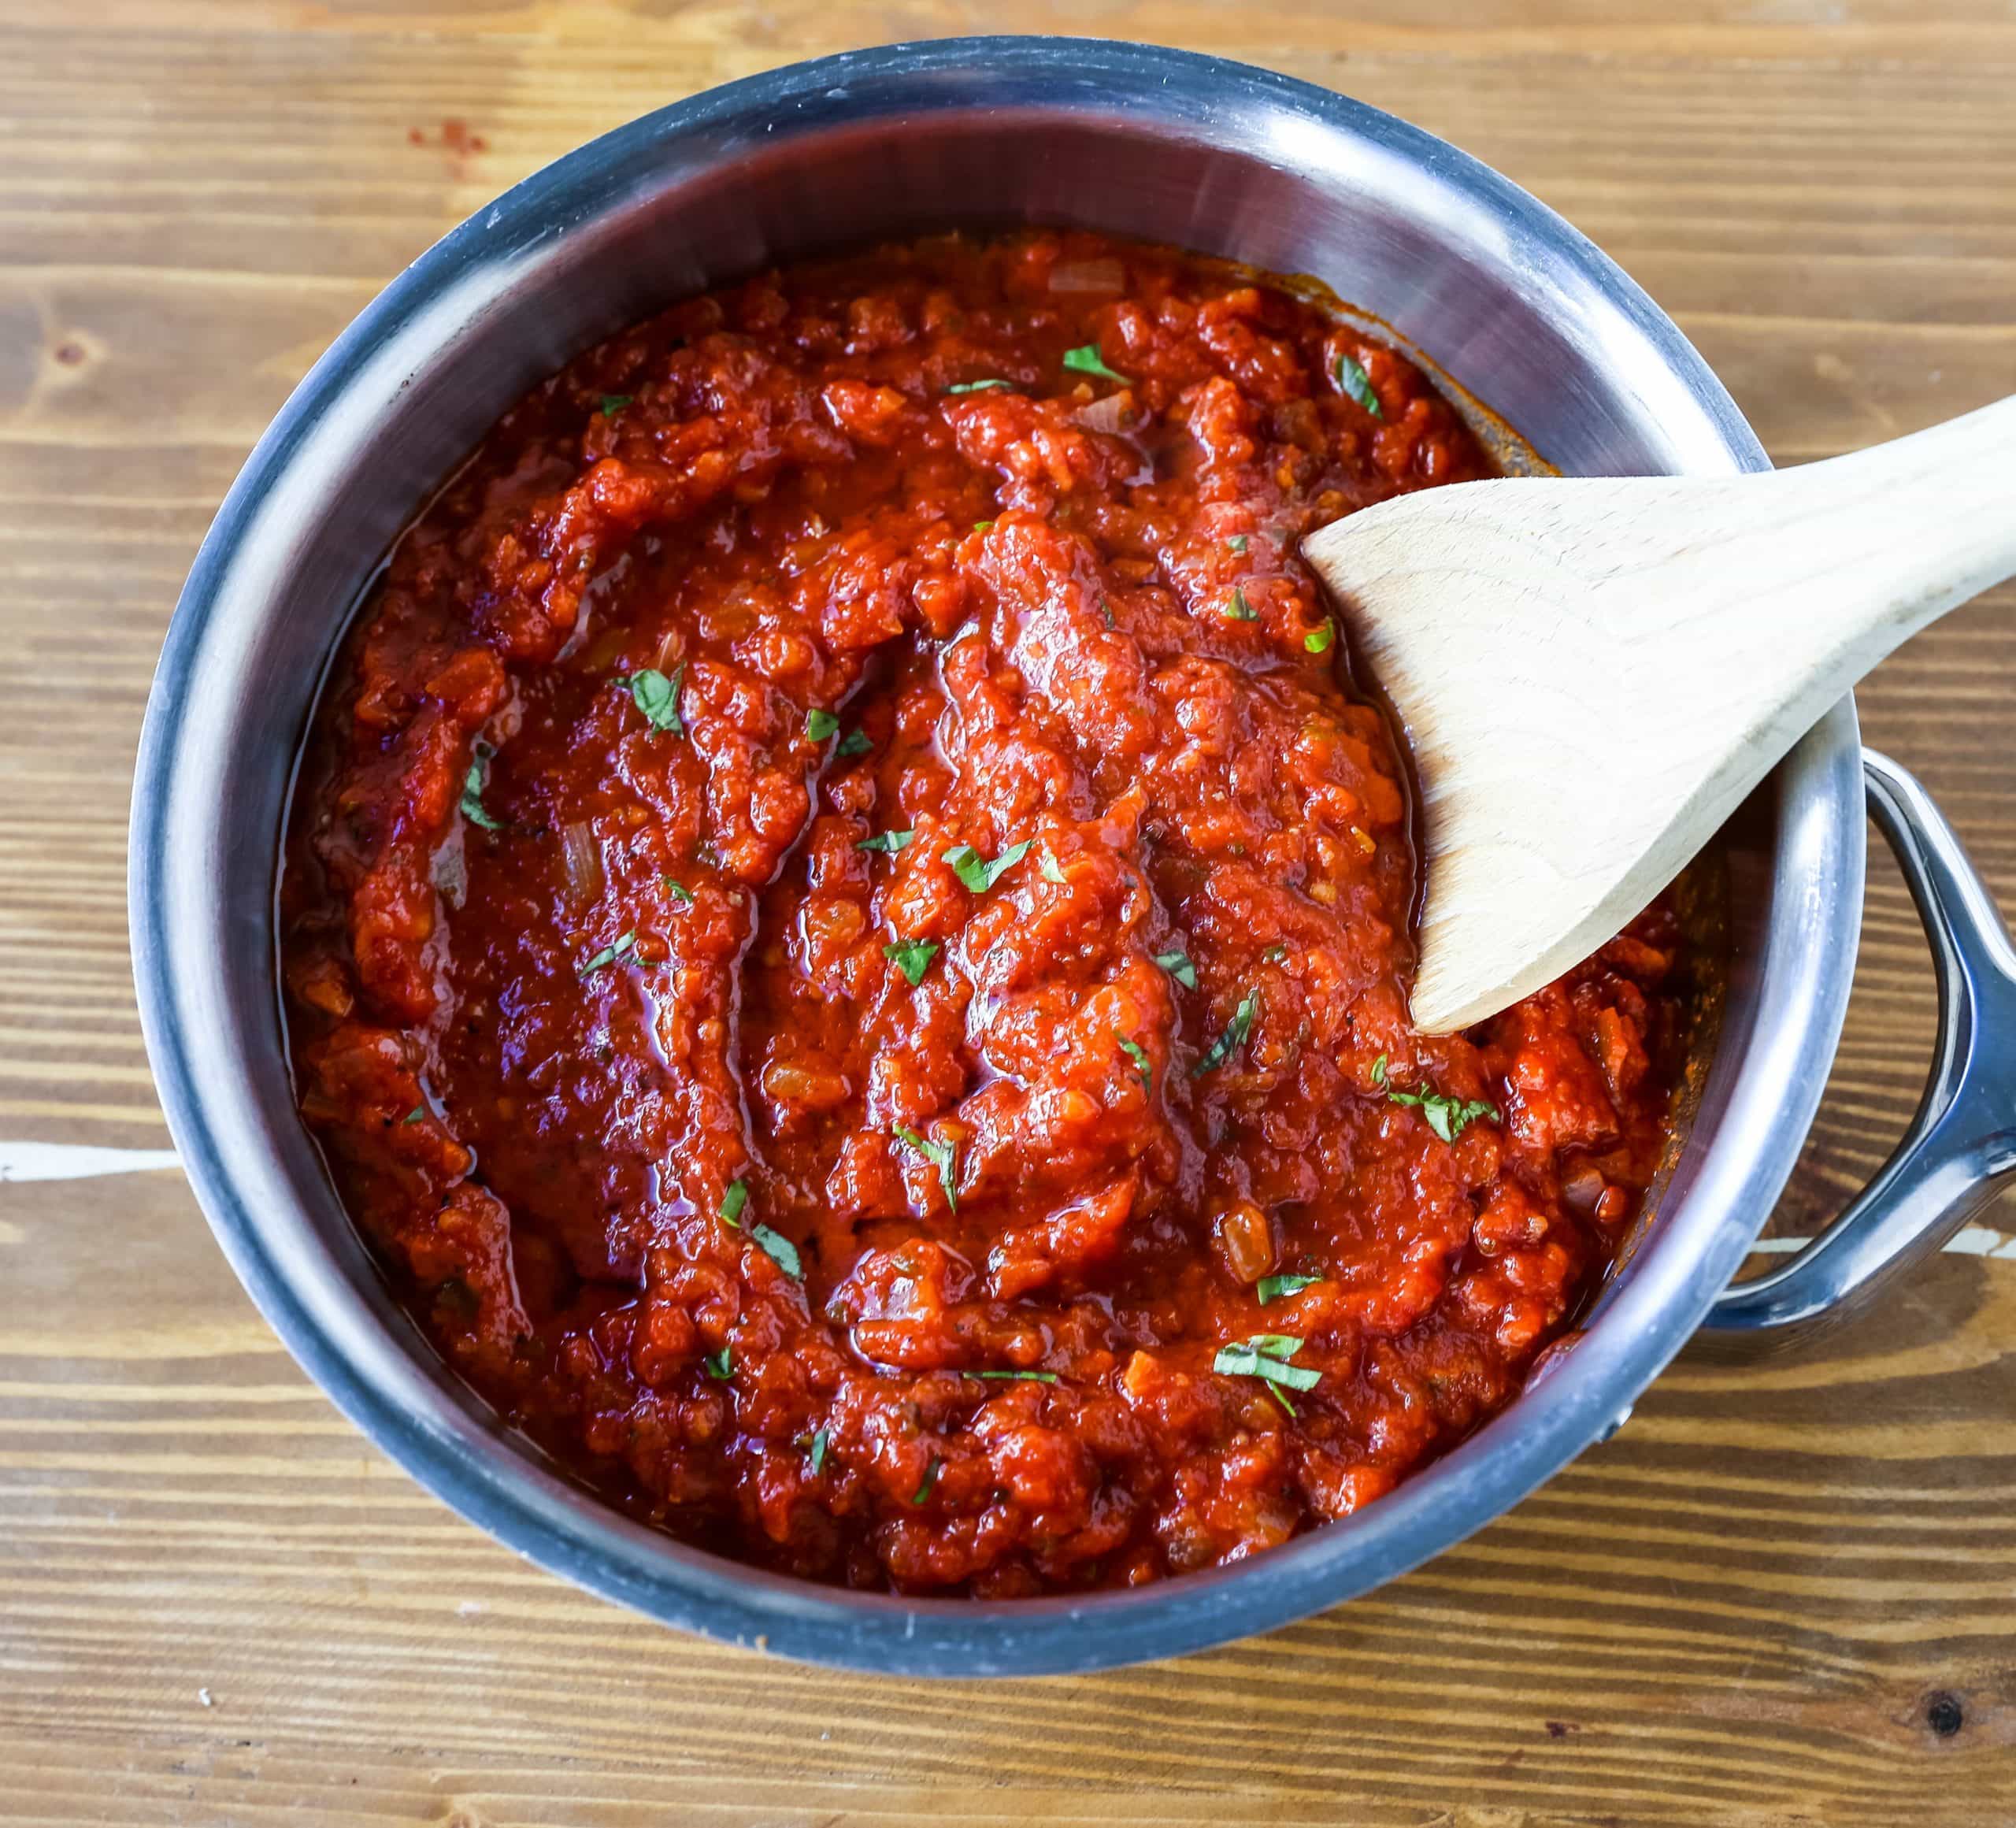 Classic Italian Tomato Sauce A robust tomato sauce made with olive oil, onion, sweet carrot, garlic, canned San Marzano tomatoes, fresh basil, tomato paste, oregano, and red pepper flakes. A flavorful, homemade tomato sauce to pair perfectly with any type of pasta. www.modernhoney.com #tomatosauce #marinara #marinarasauce #italian #italianfood